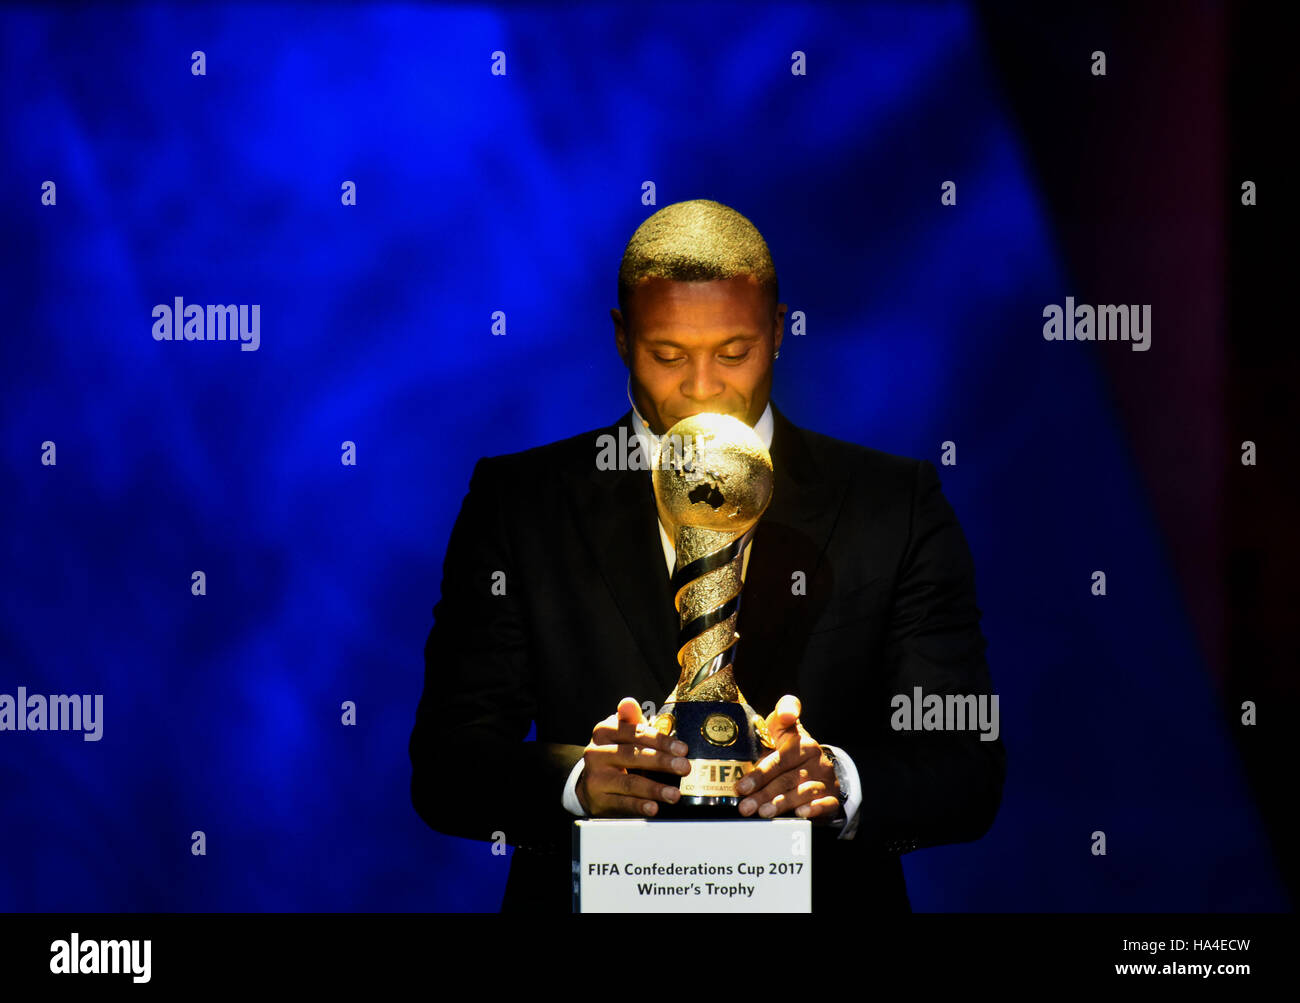 Kazan, Russia. 26th Nov, 2016. Brazilian soccer player Julio Baptista brings the trophy on stage during the official draw ceremony for Confederations Cup 2017 in Kazan, Russia, Nov. 26, 2016. © Evgeny Sinitsyn/Xinhua/Alamy Live News Stock Photo